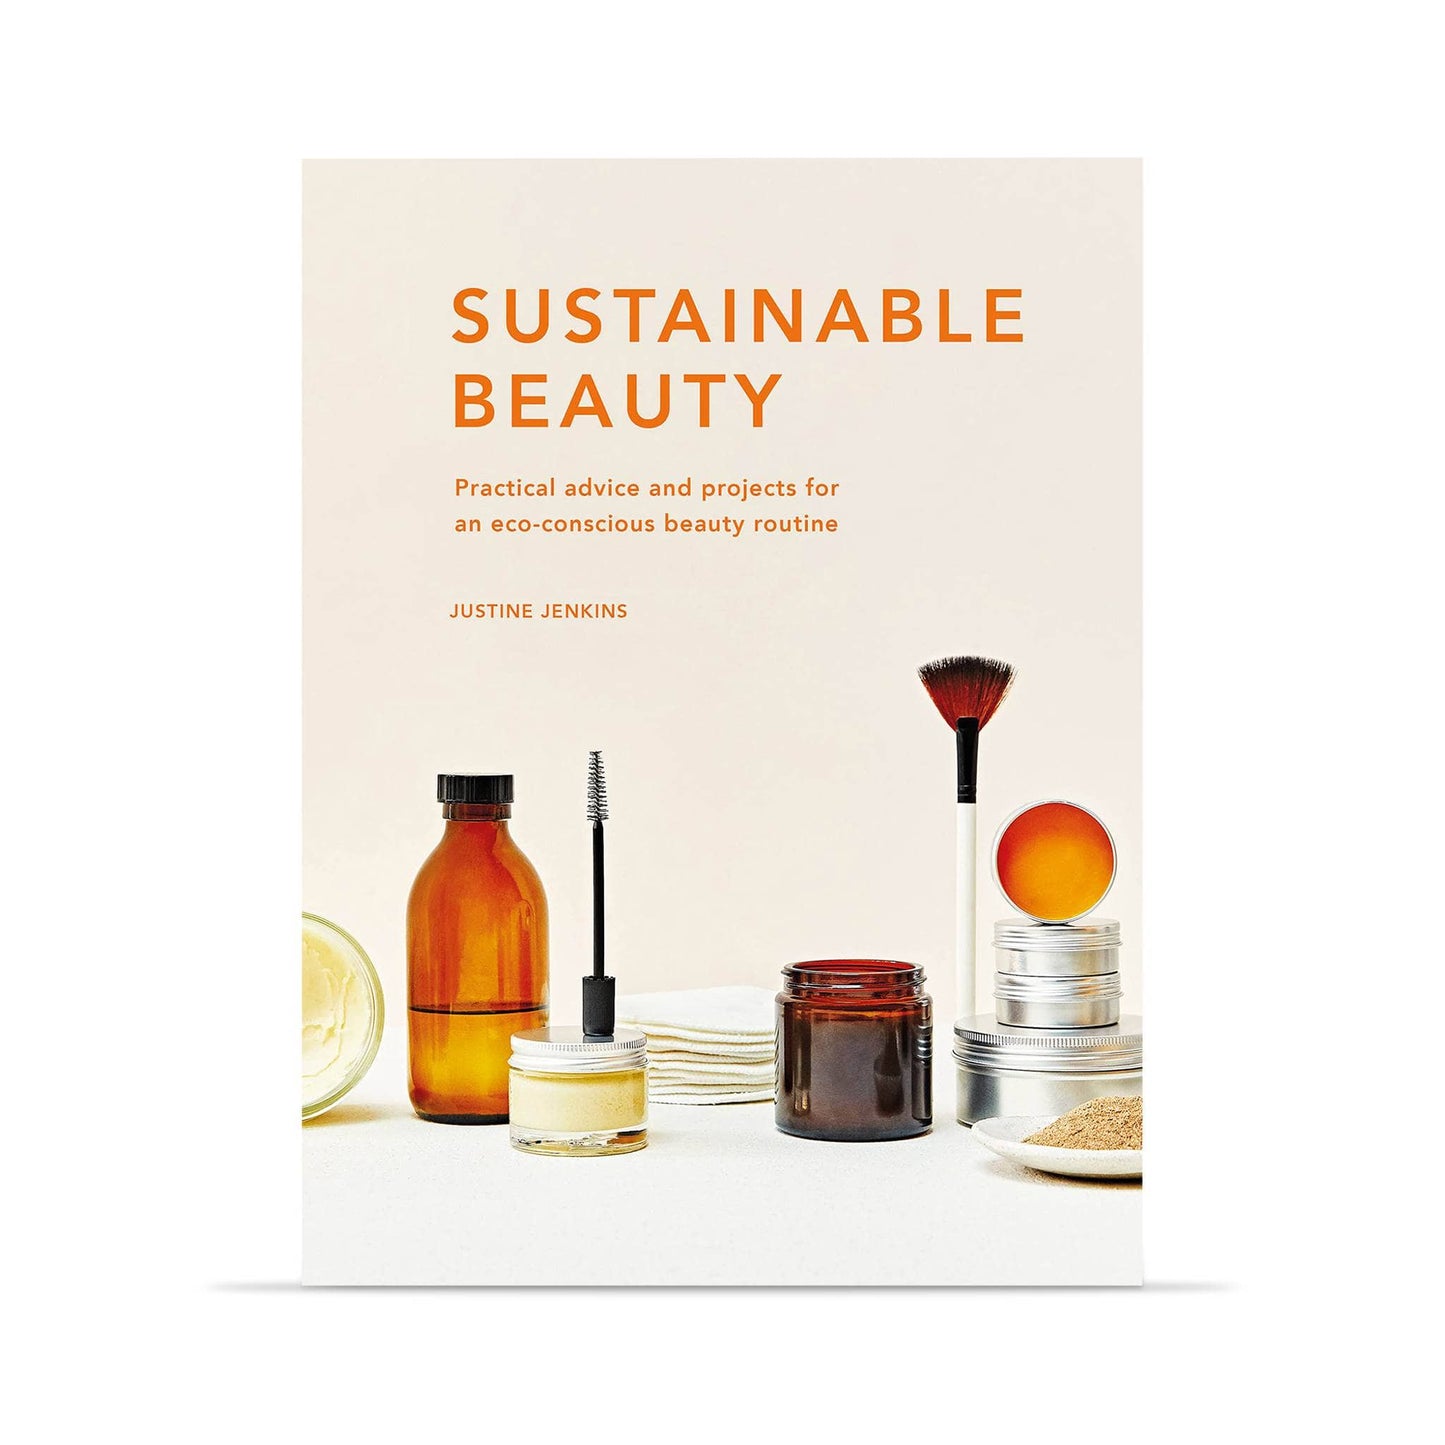 Our Bookshelf Print Books Sustainable Beauty - Practical Advice and Projects for an Eco-conscious Beauty Routine - Justine Jenkins